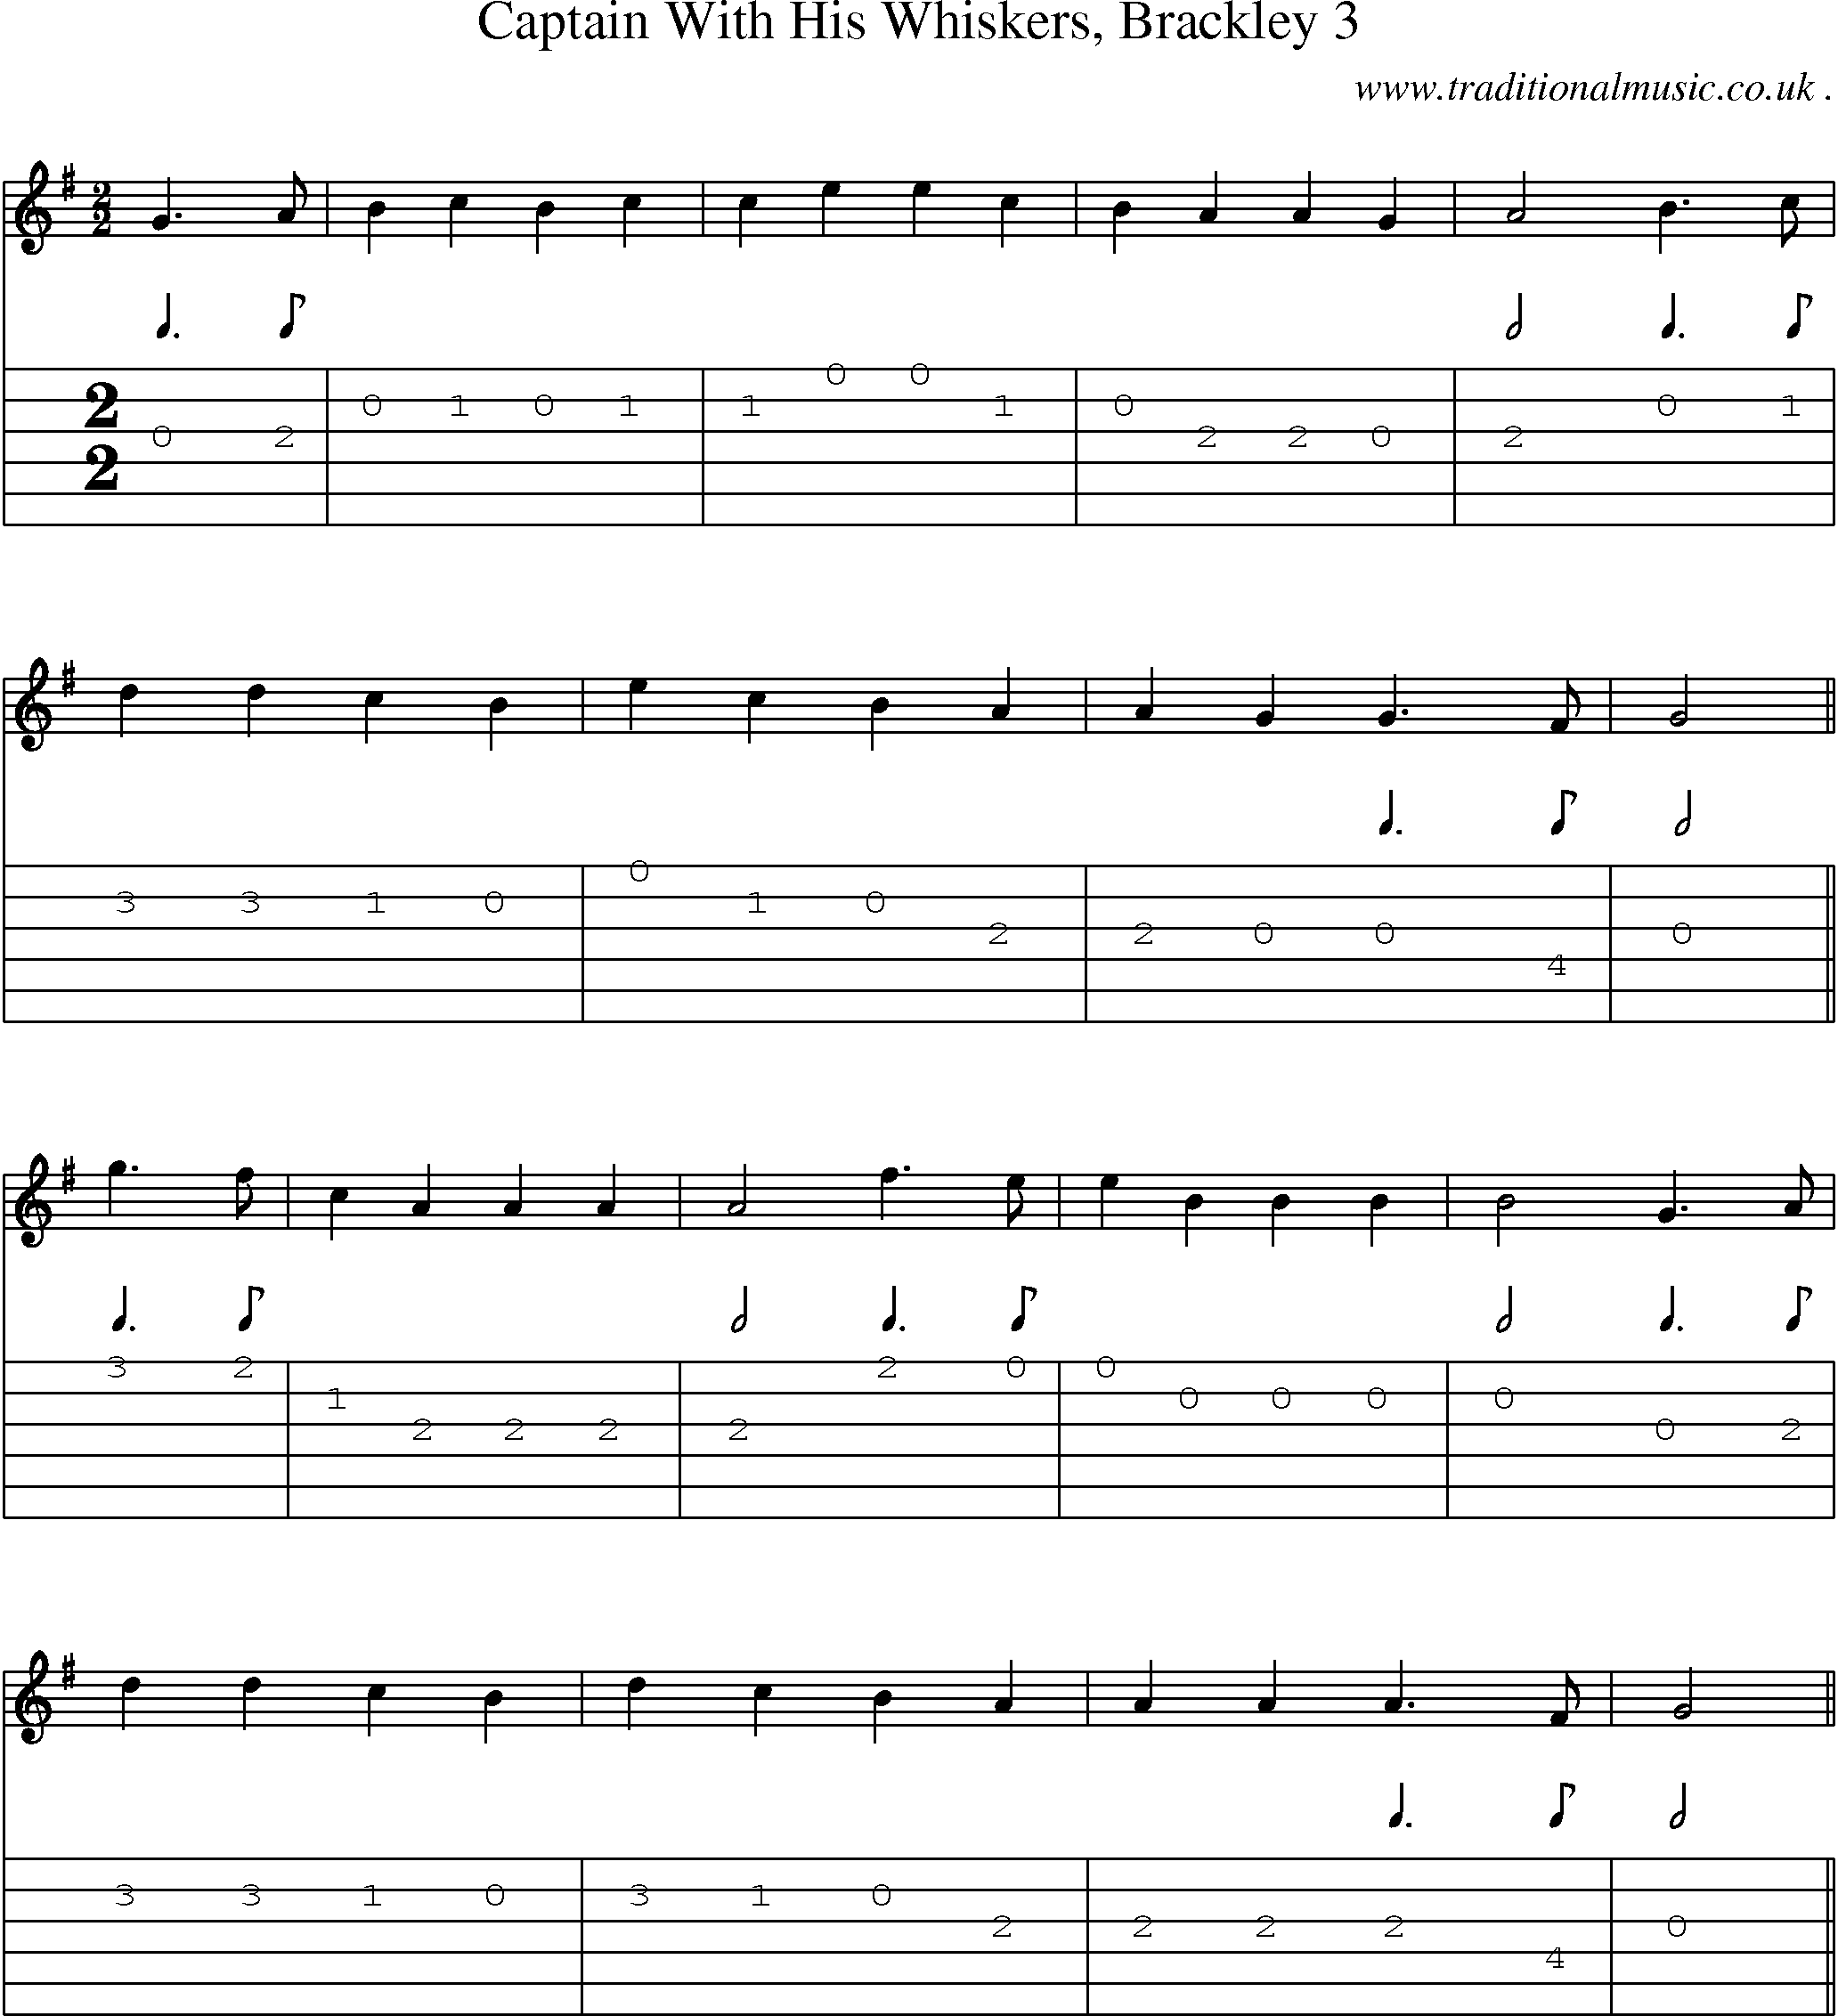 Sheet-Music and Guitar Tabs for Captain With His Whiskers Brackley 3